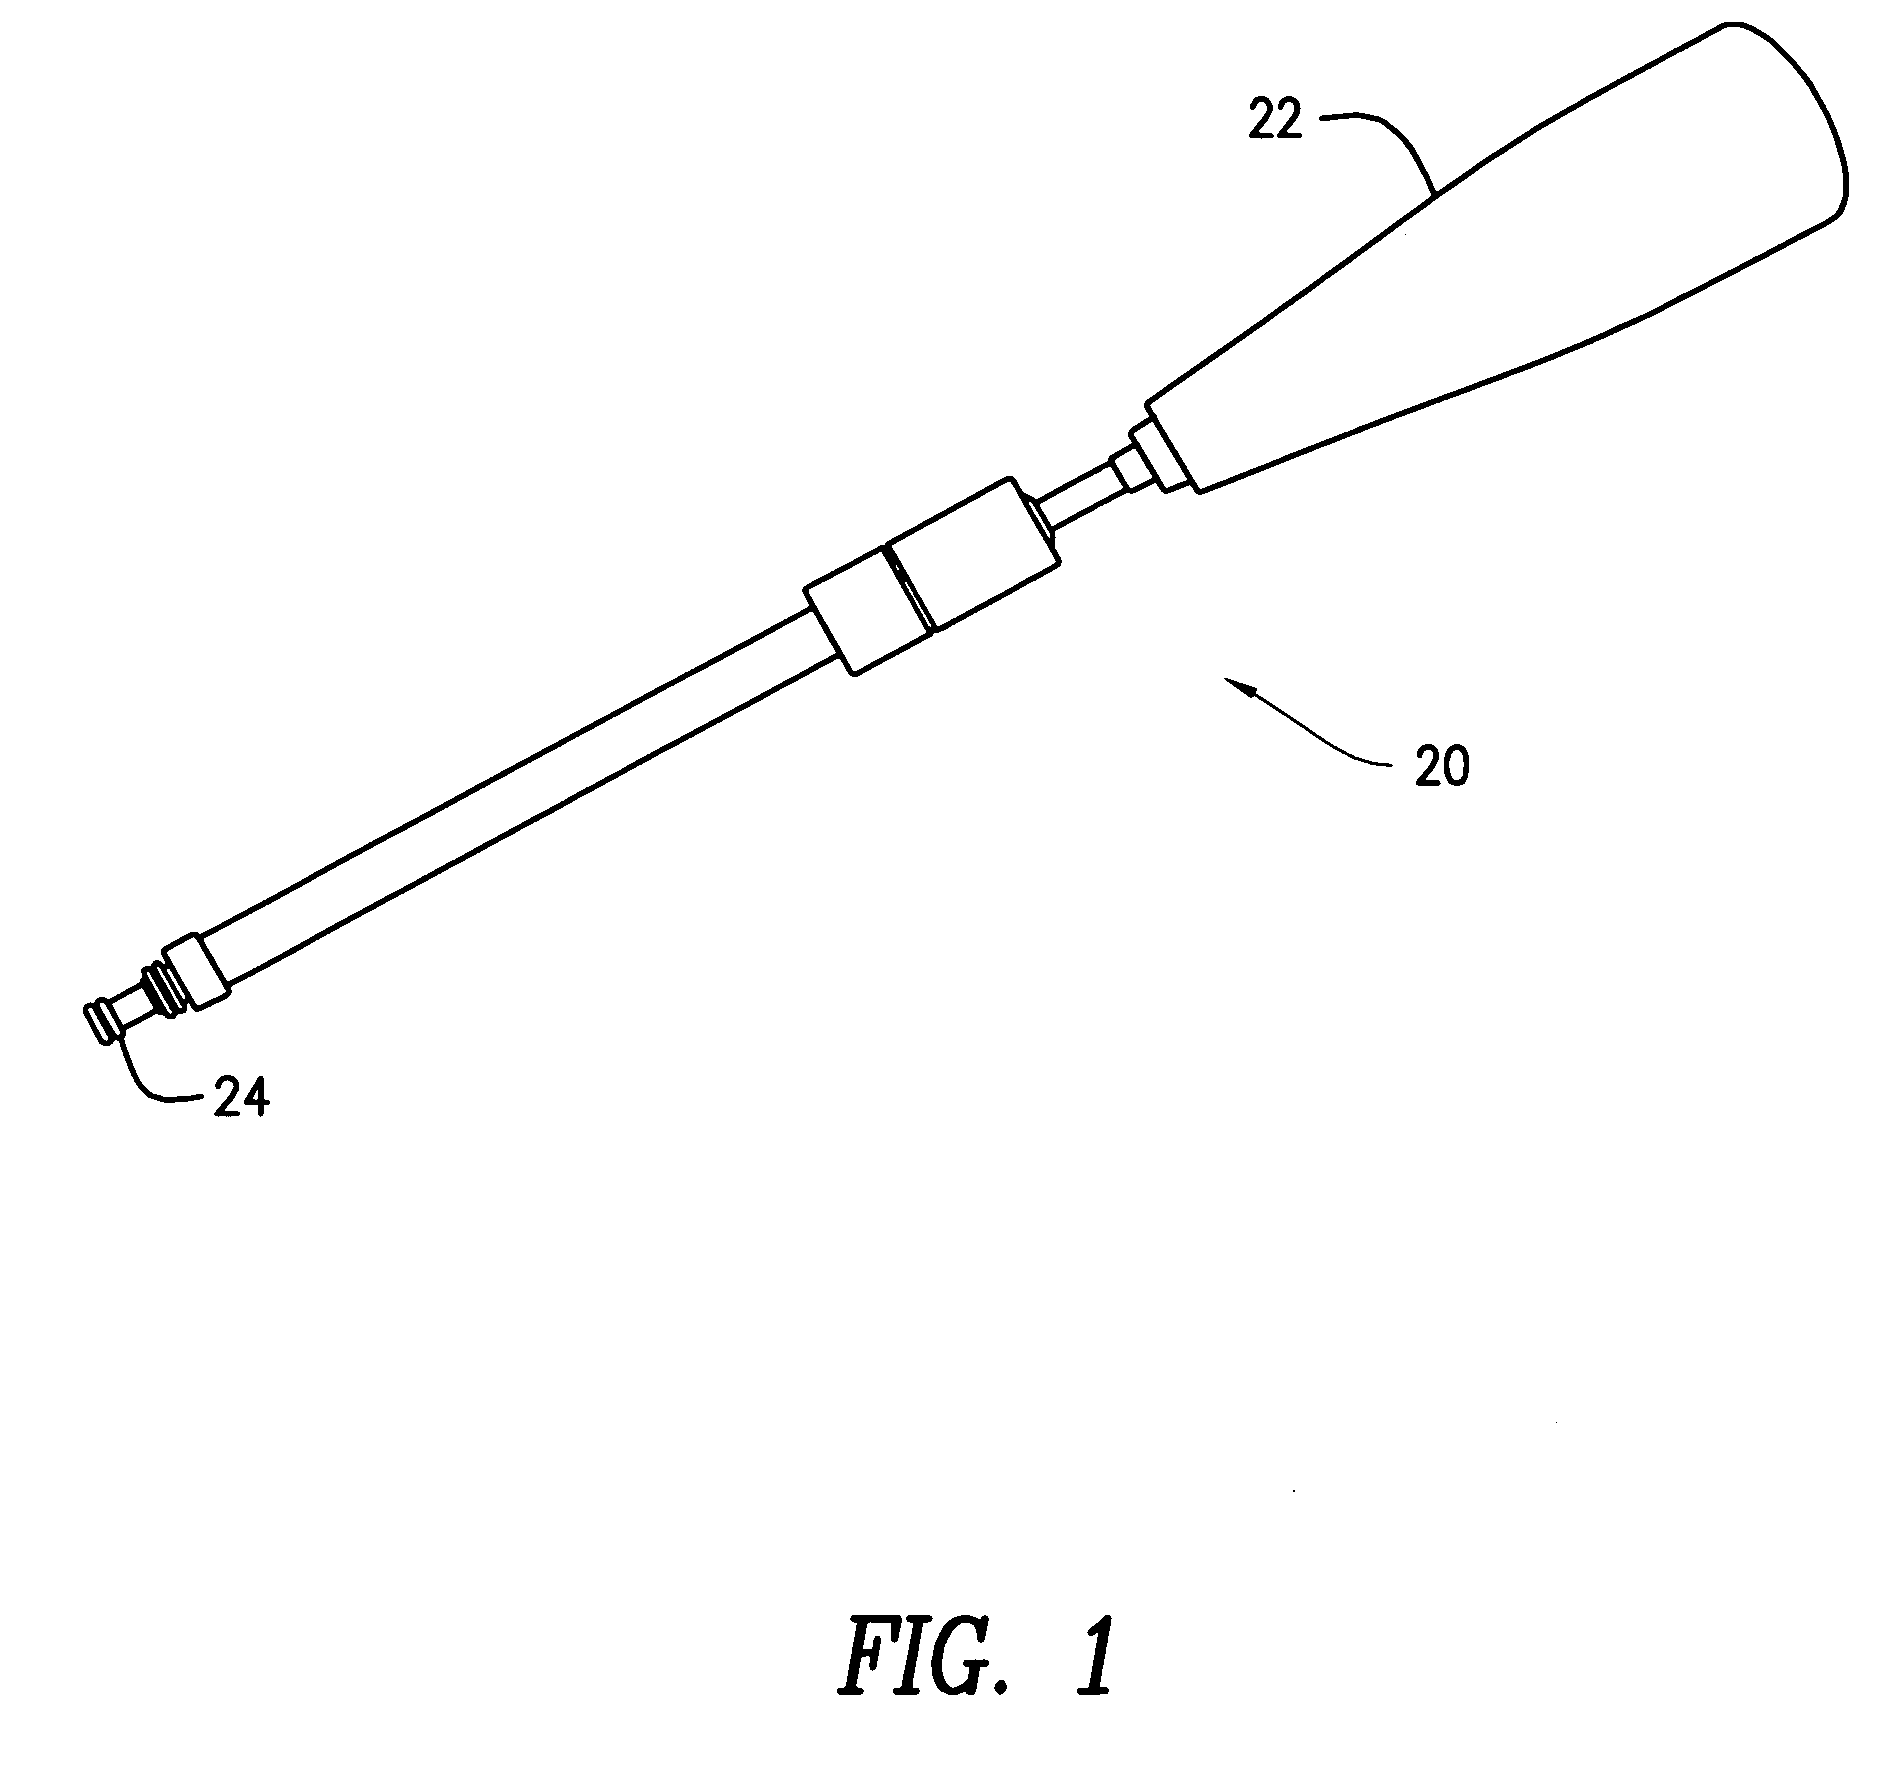 Polyaxial screwdriver for a pedicle screw system